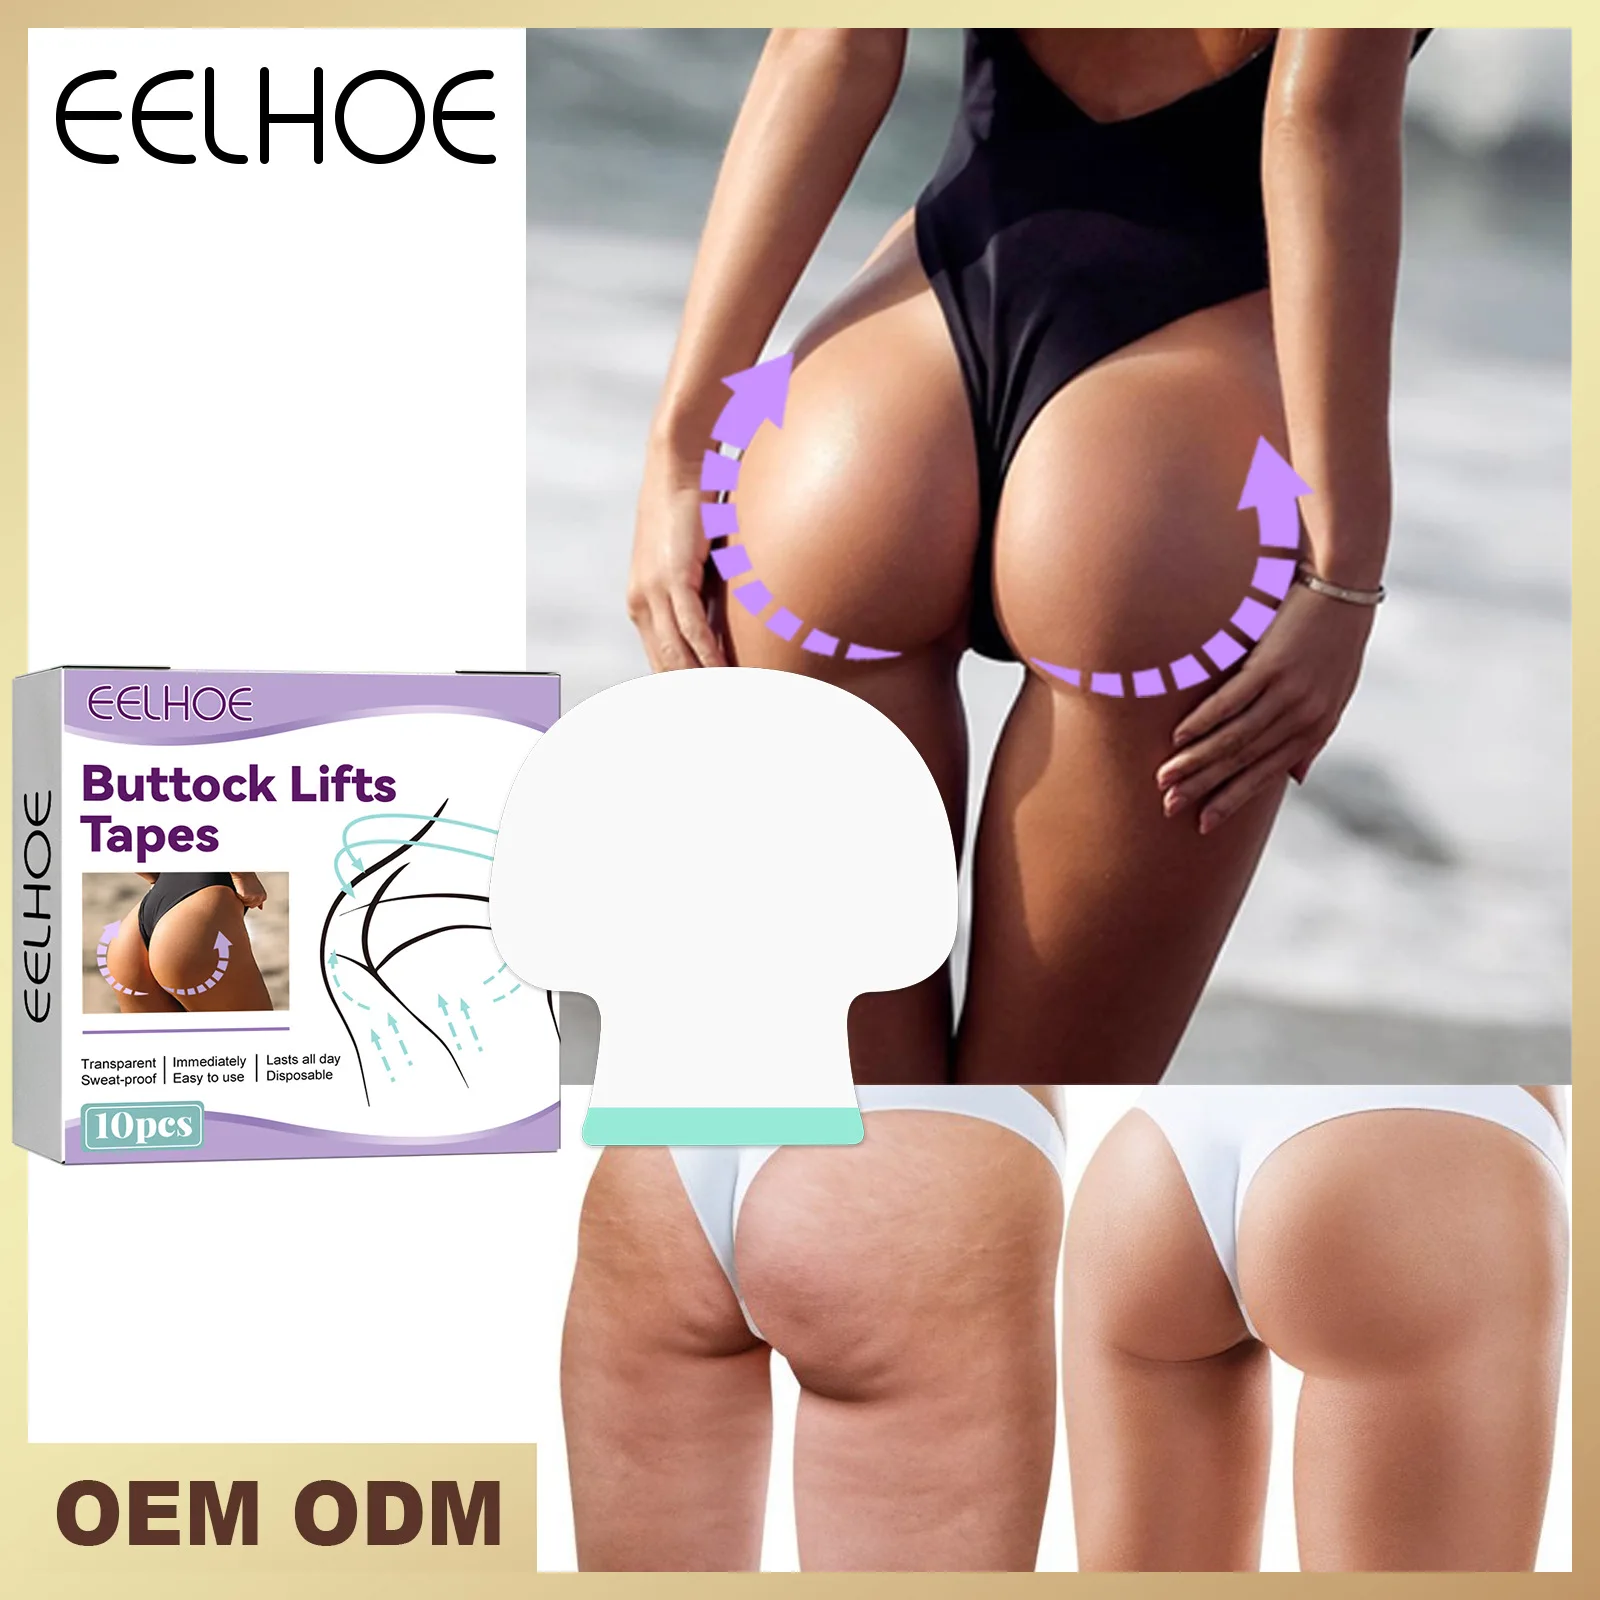 EELHOE Buttocks Lifting Patch Lifting Buttocks Peach Buttocks Accentuate The Body Buttocks Curve Shaping Lifting Patch